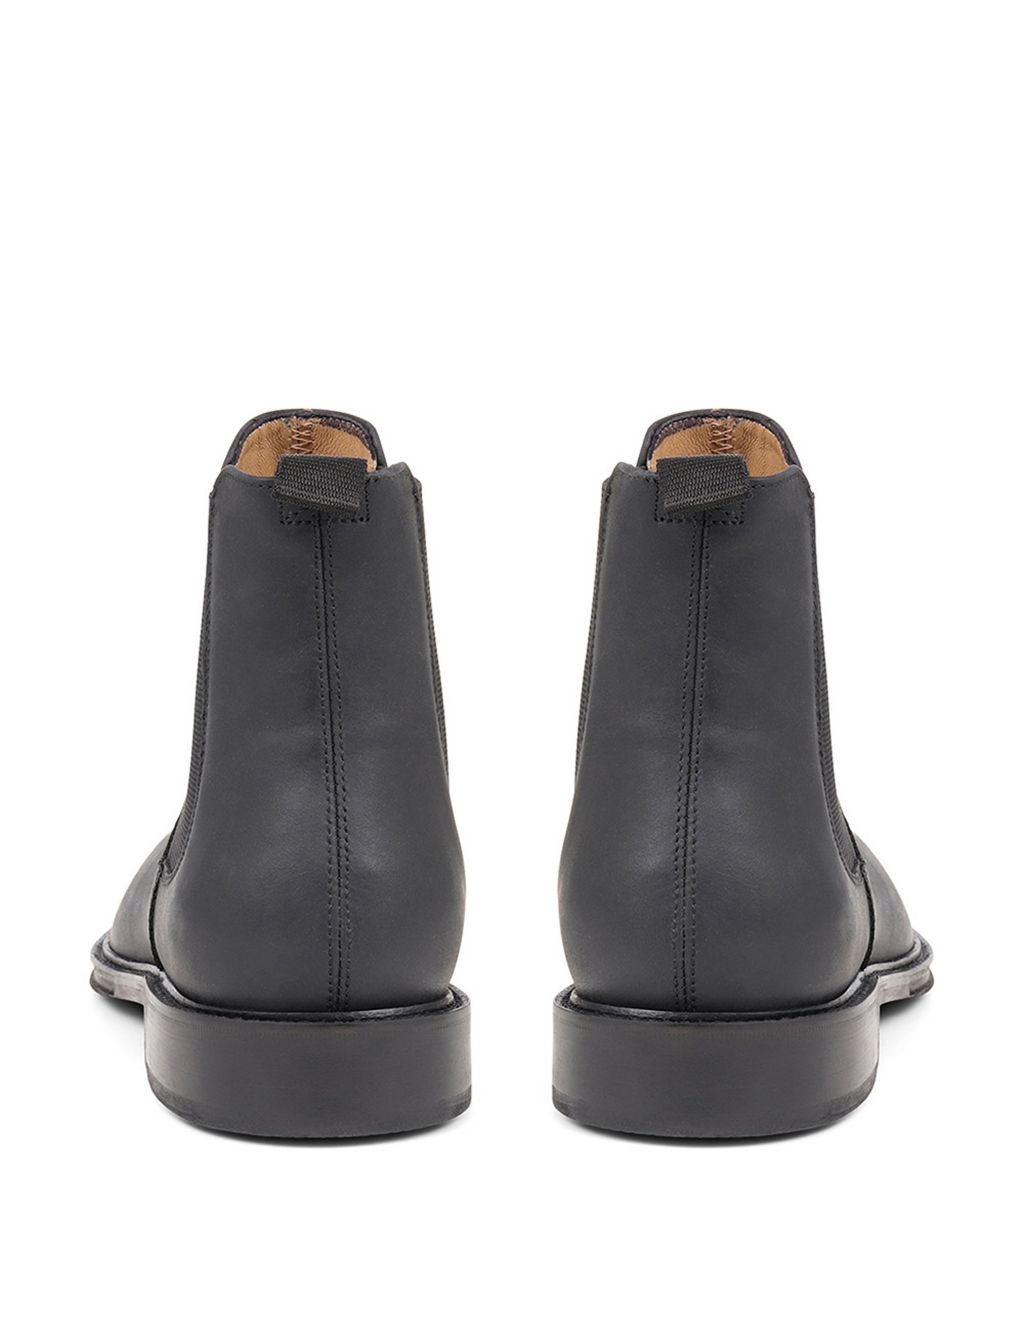 Leather Pull On Chelsea Boots image 4